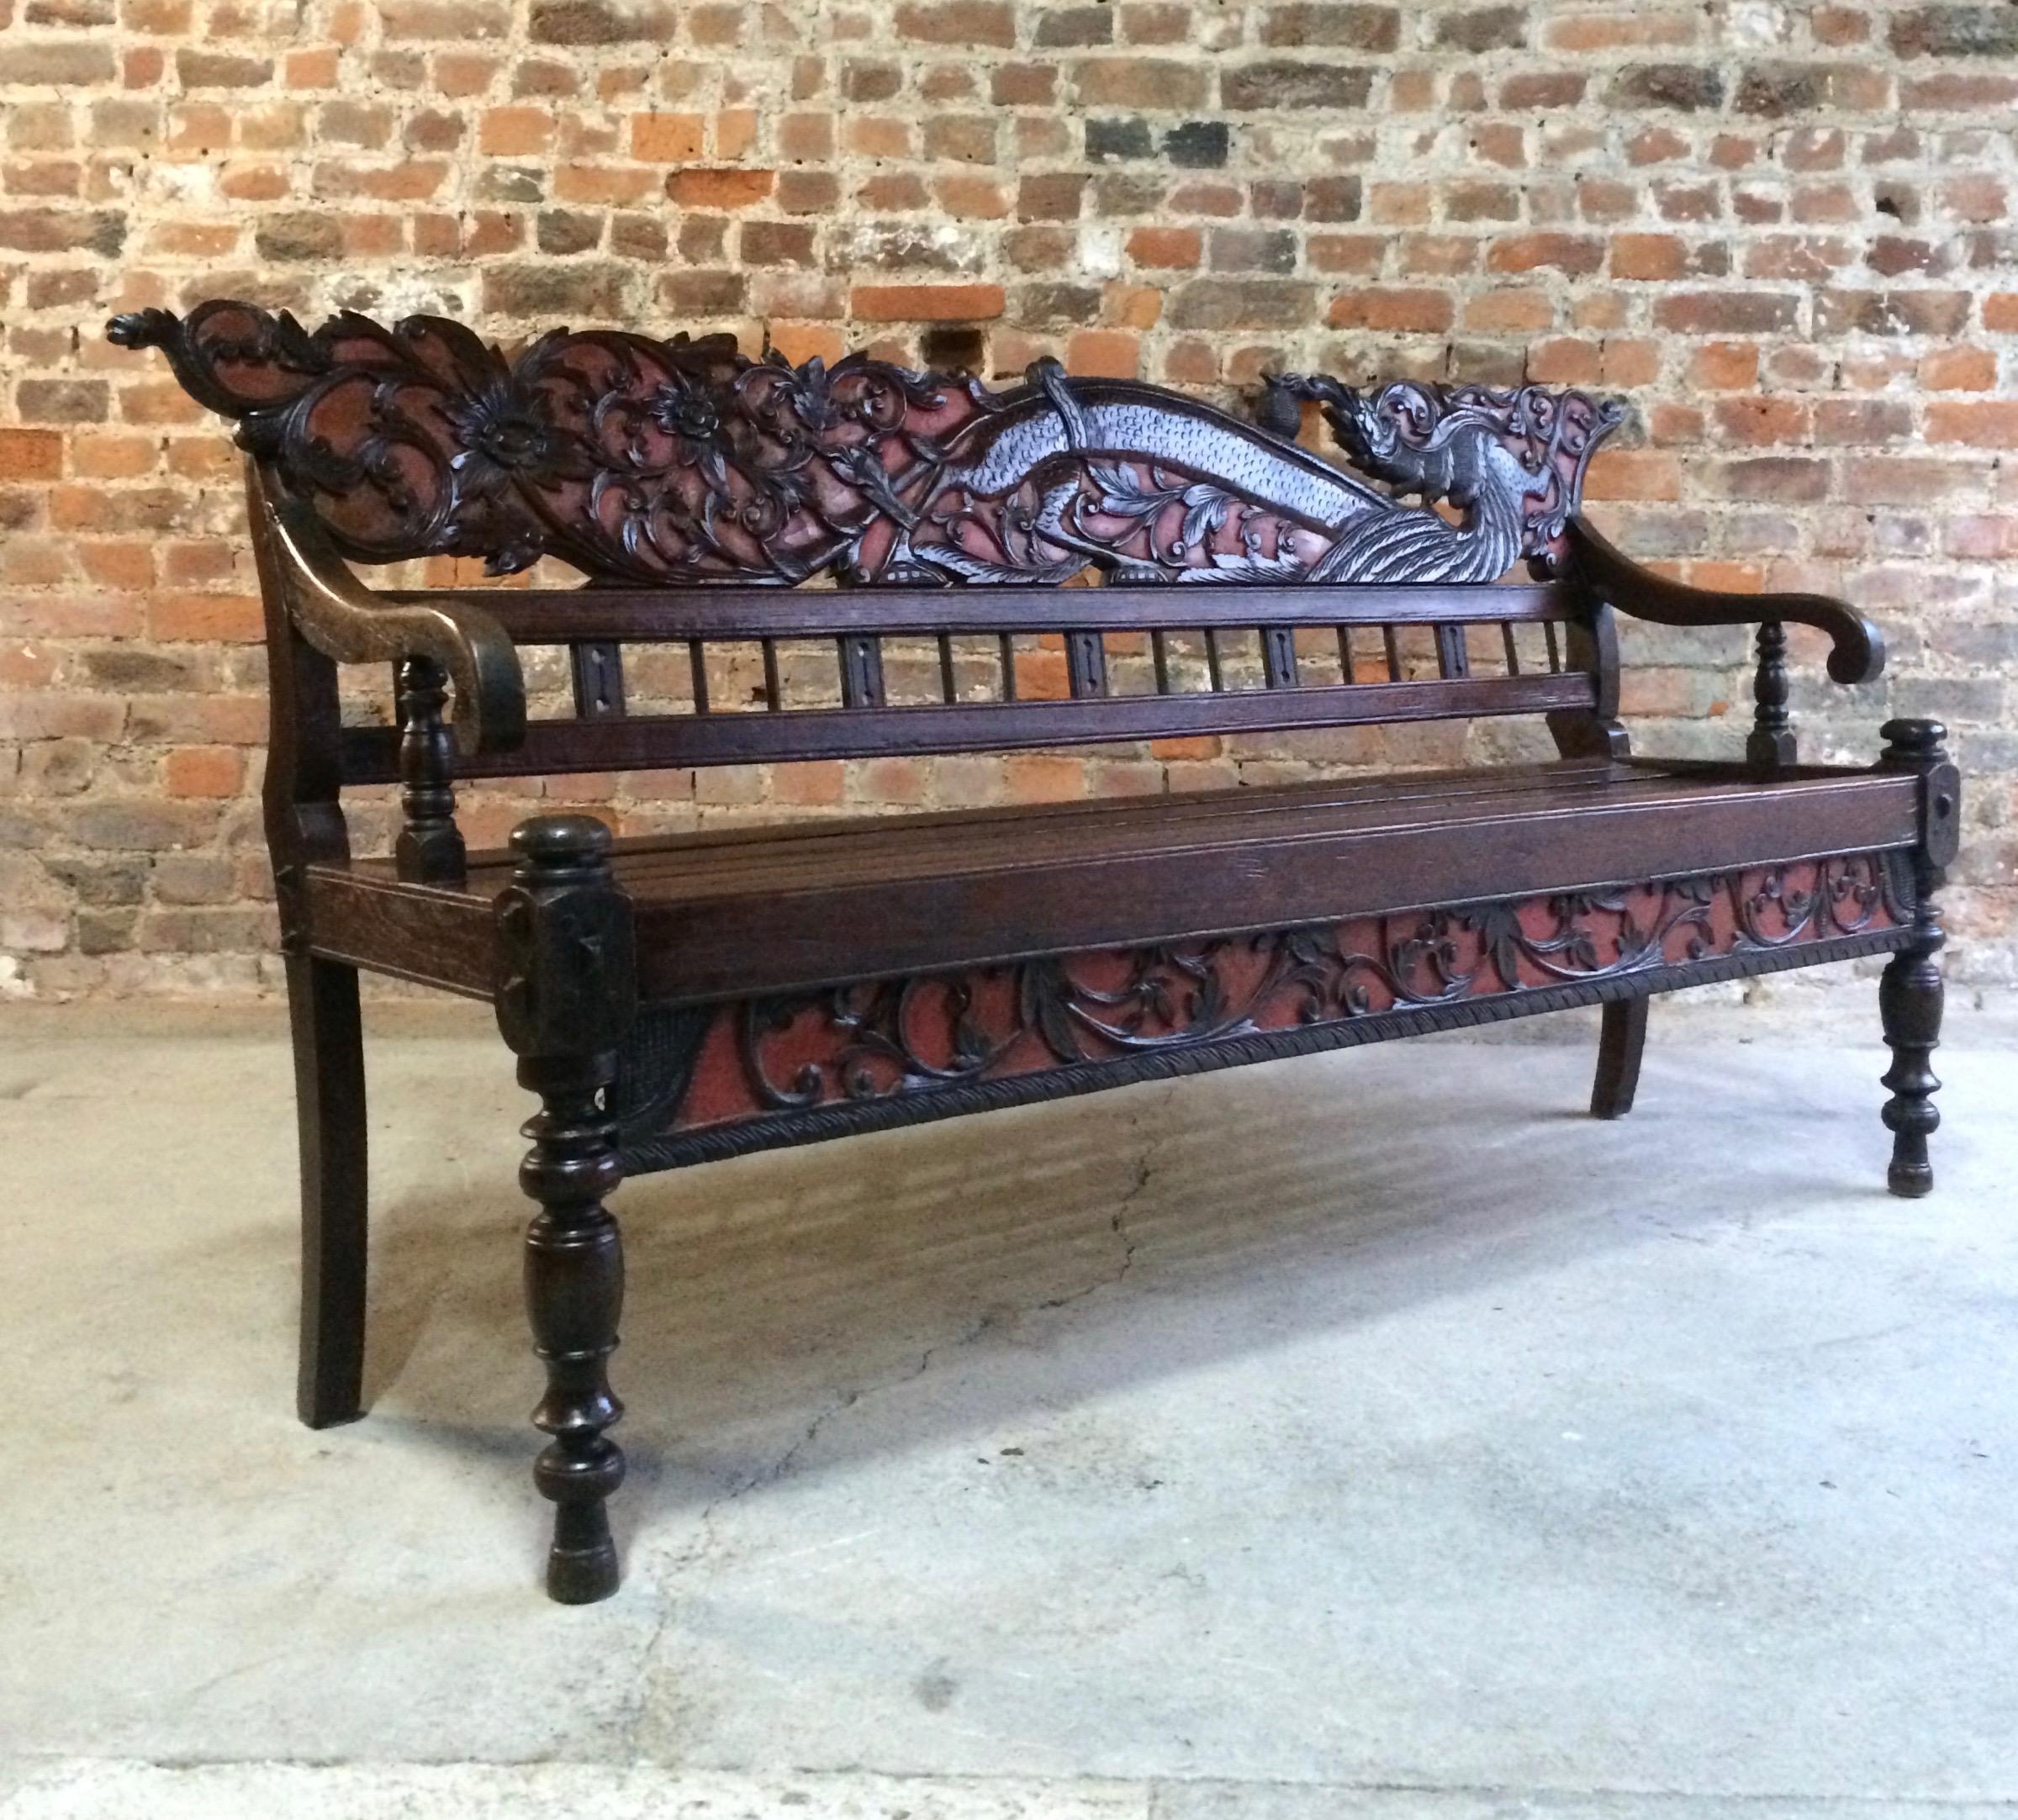 Antique Chinese Hall Seat Bench Heavily Carved Qing Dynasty 19th Century 1860 1